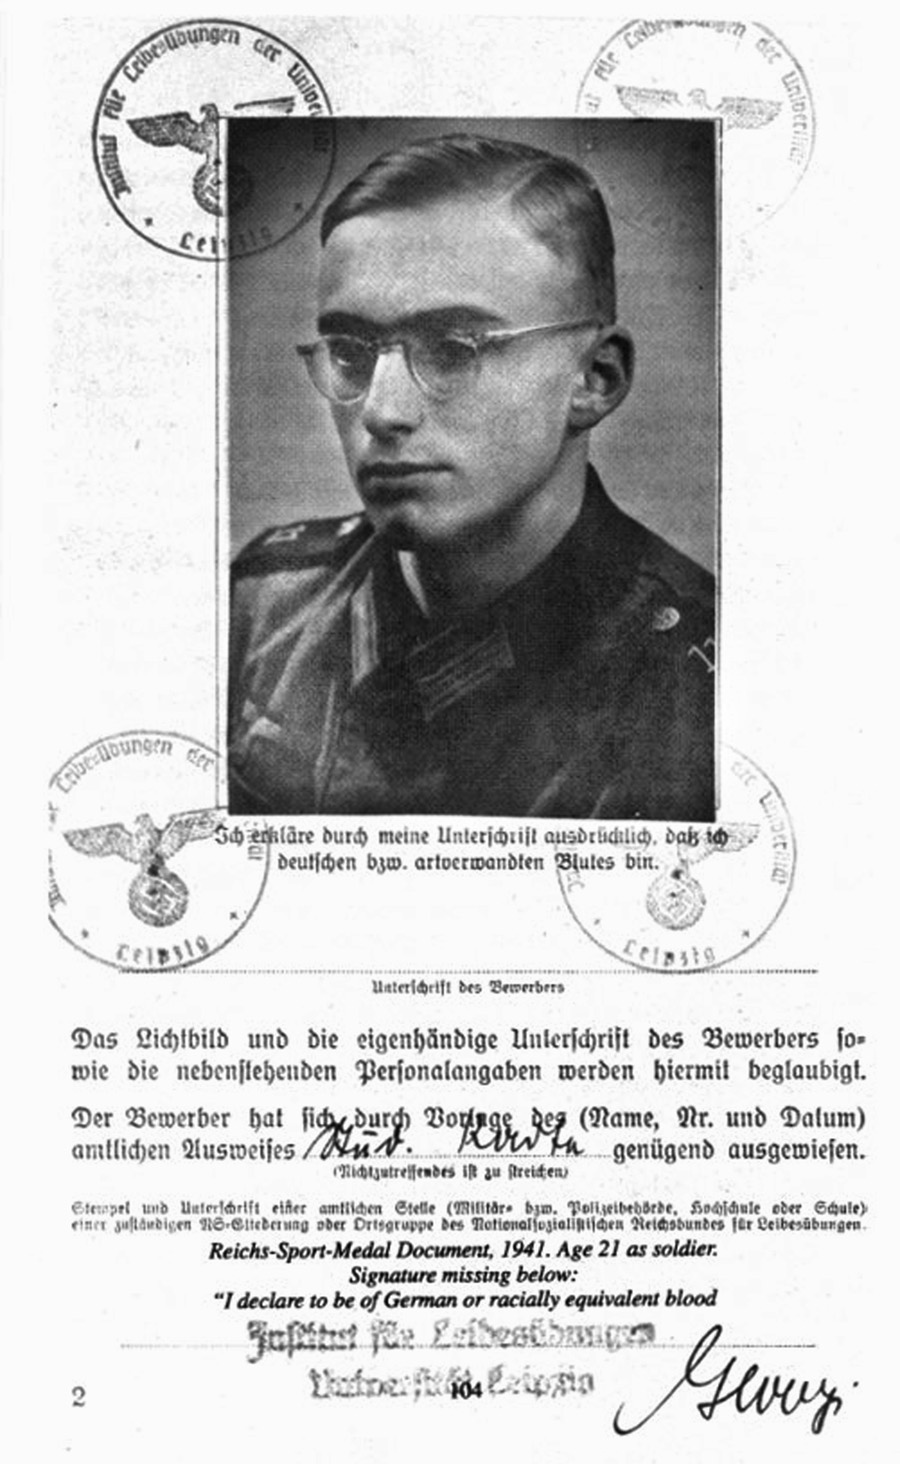 A page from Dieter Bergmann’s Wehrmacht pay book. A half-Jew, he loved his country but agonized about fighting for a regime that persecuted his fellow religionists.